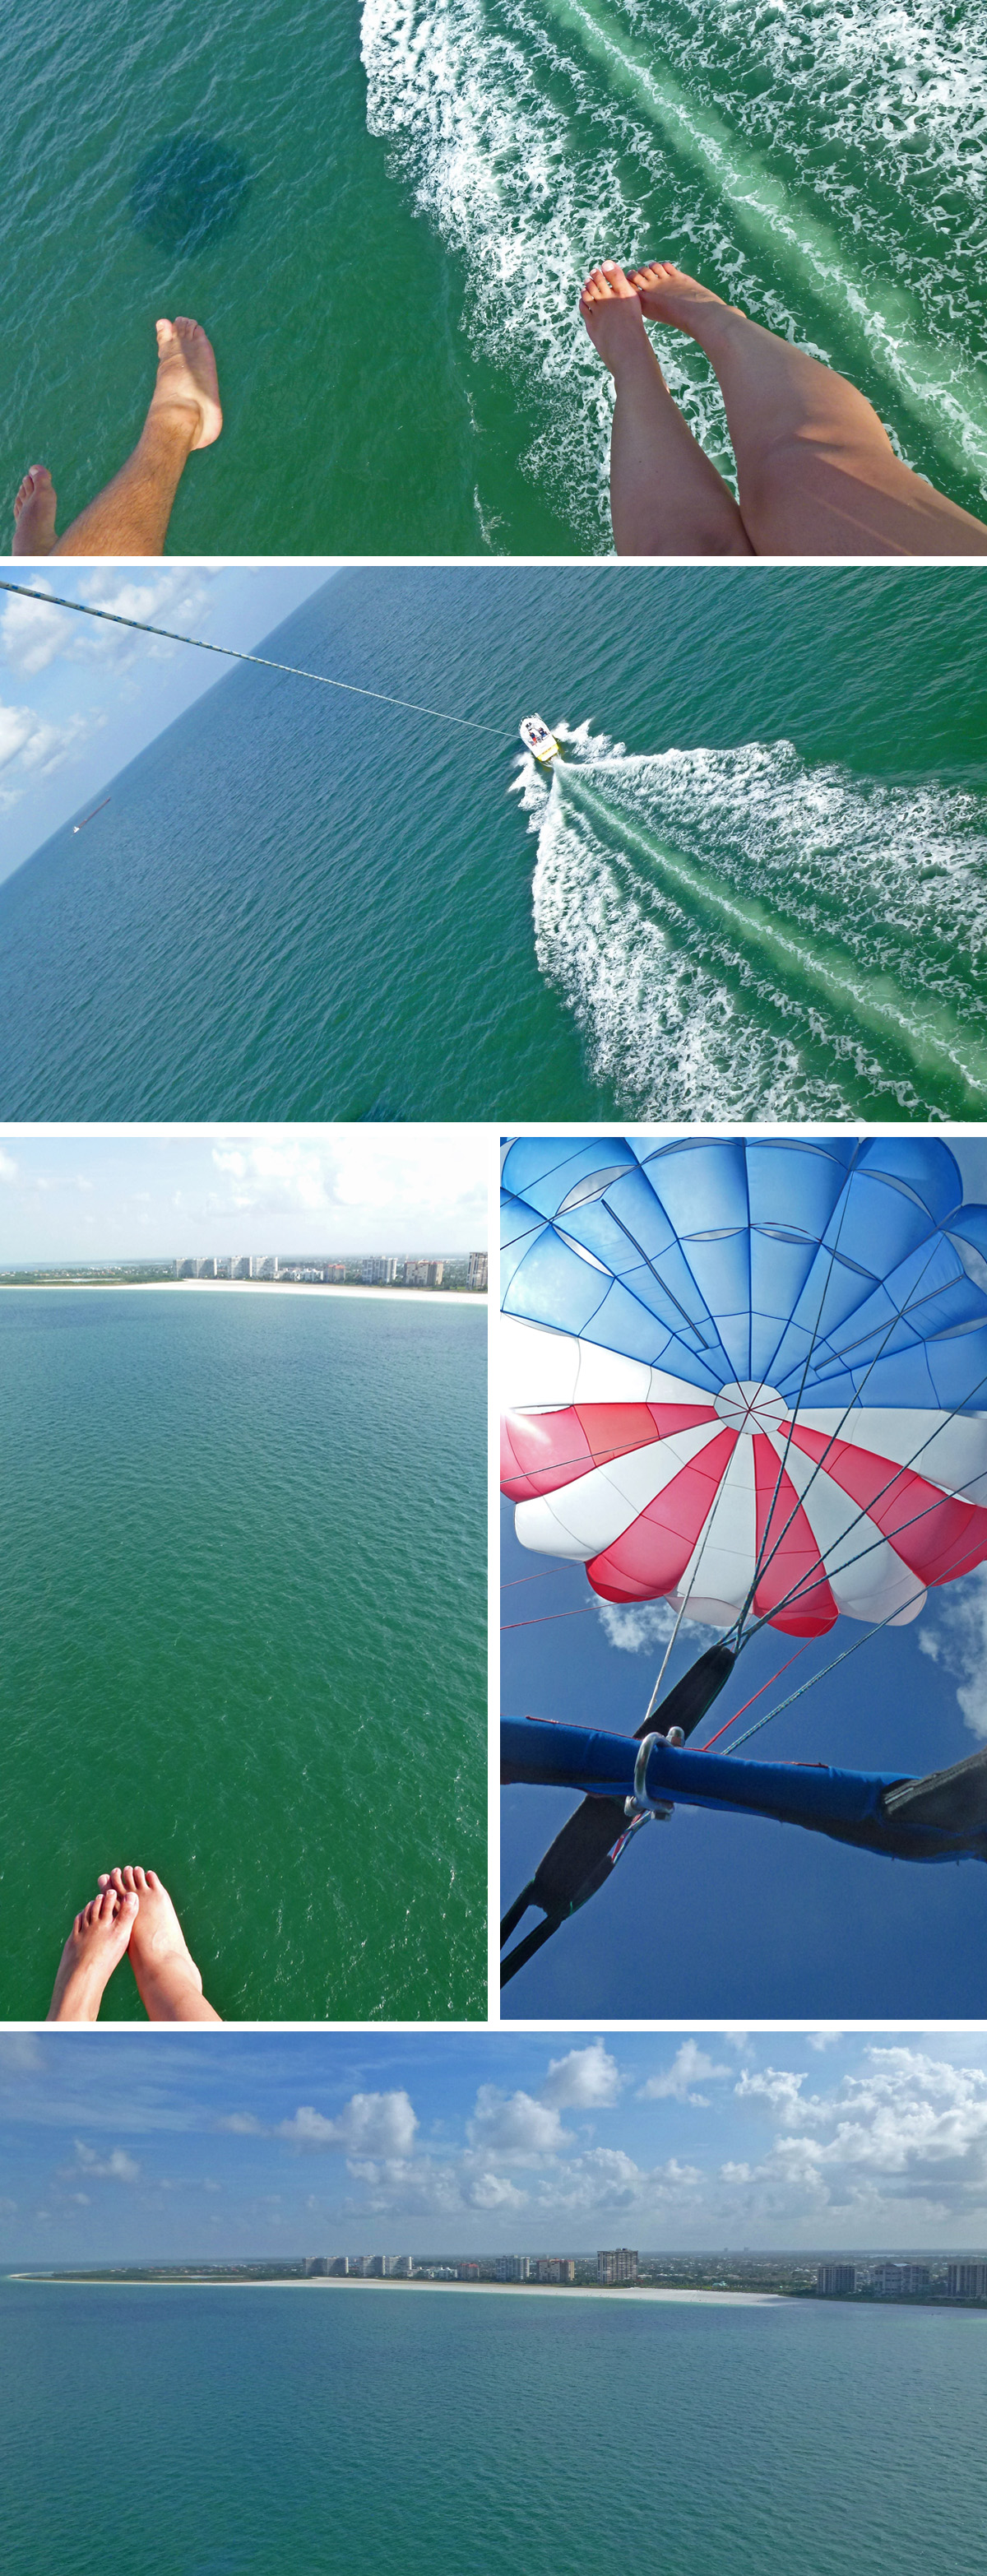 Marco Island Water Sports Review Parasailing